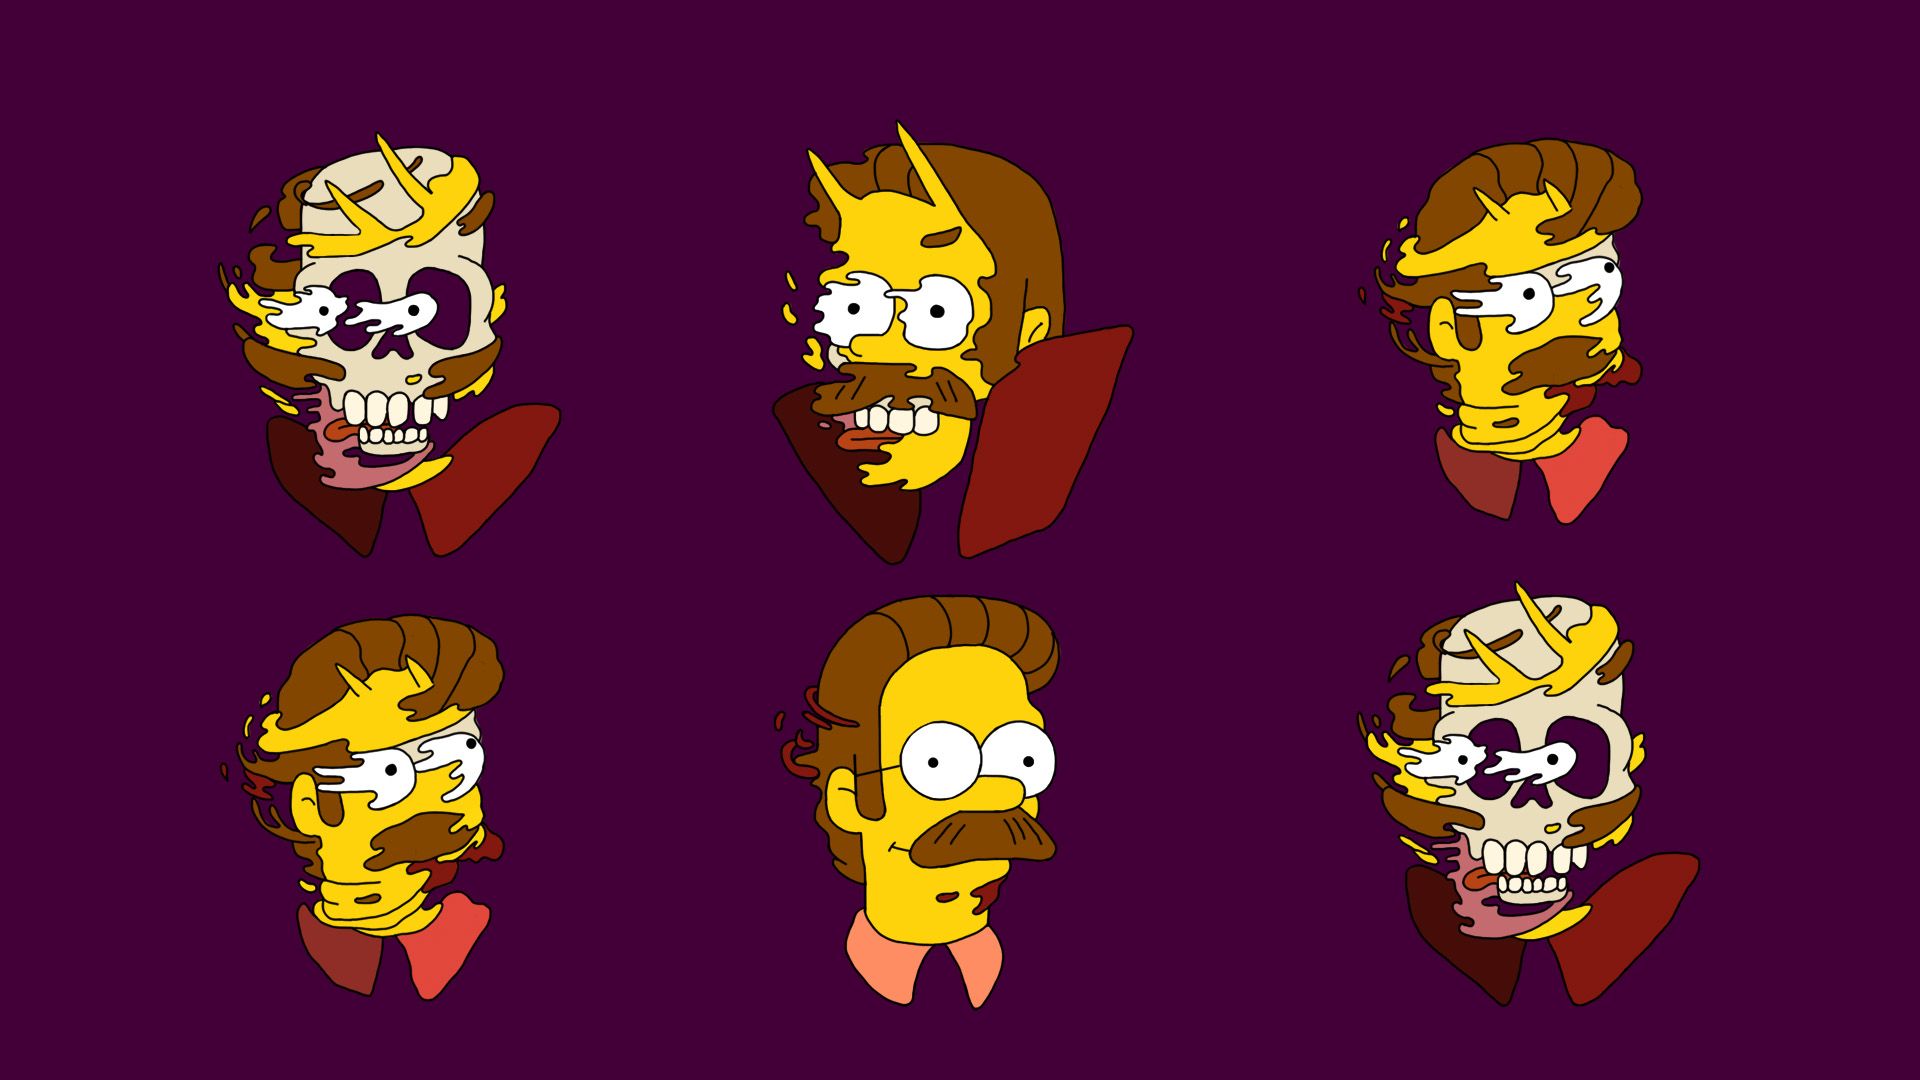 Simpsons: TREEHOUSE OF HORROR